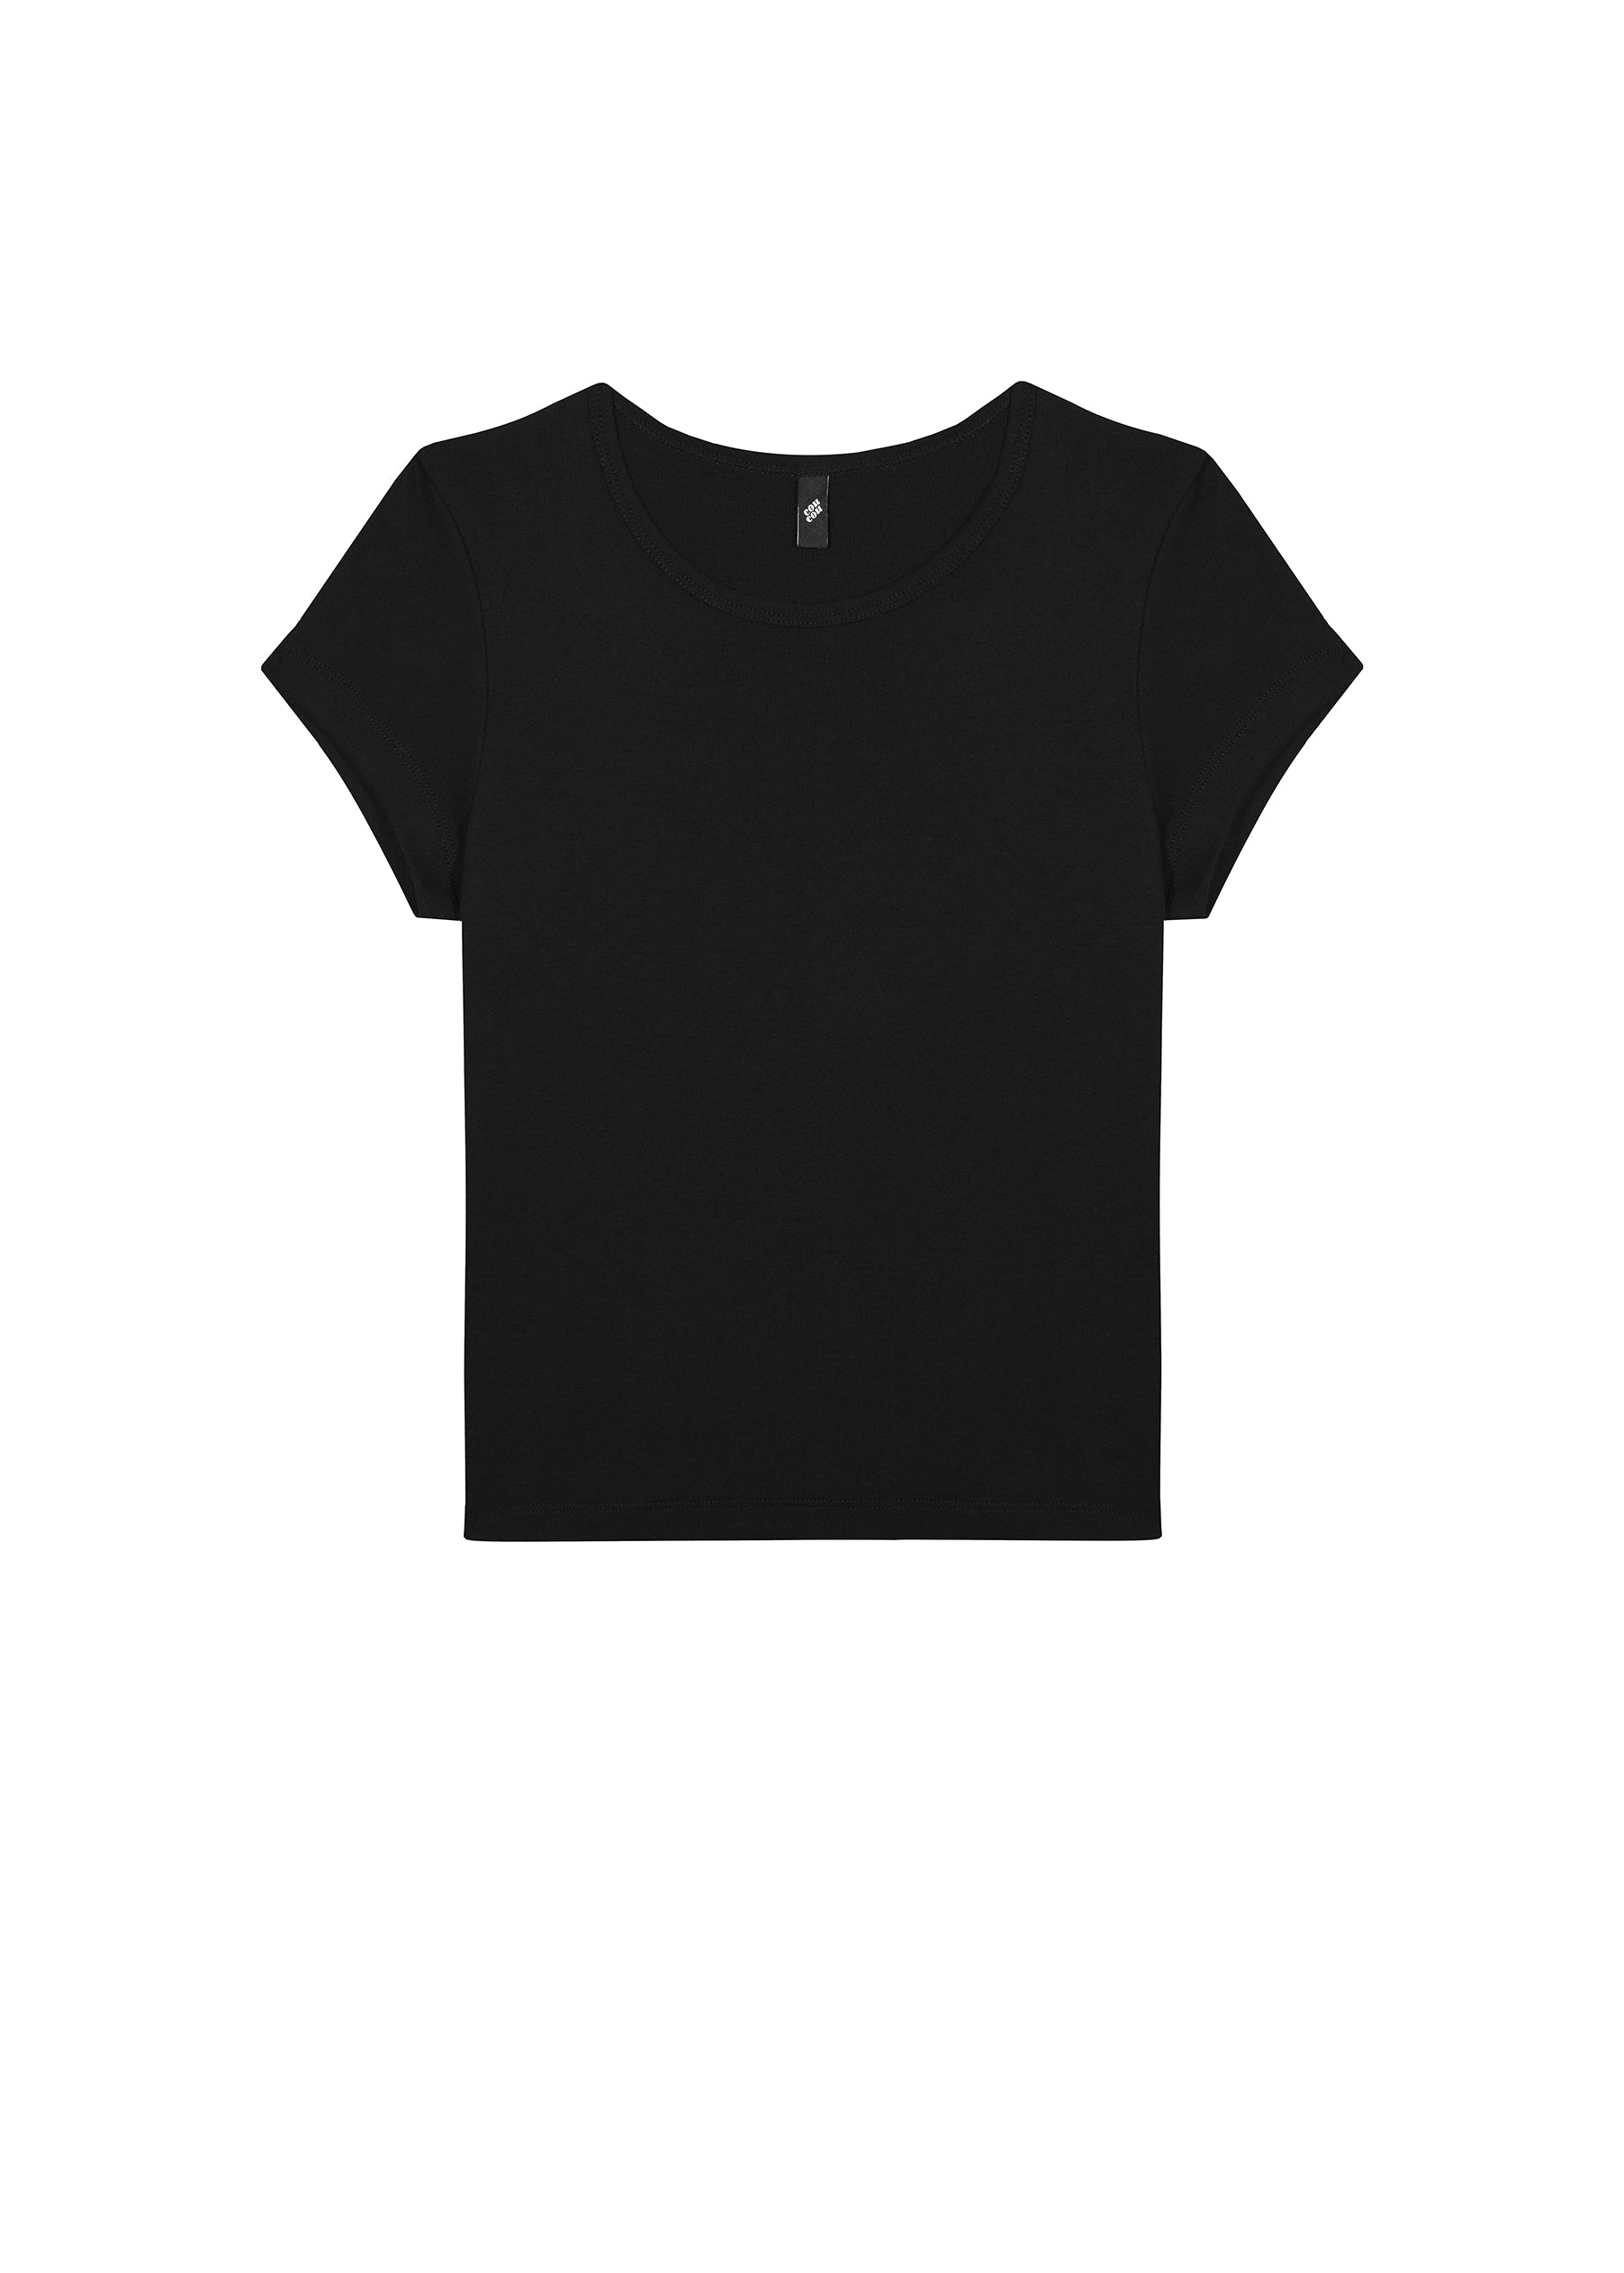 The Baby Tee: Cotton Jersey Black